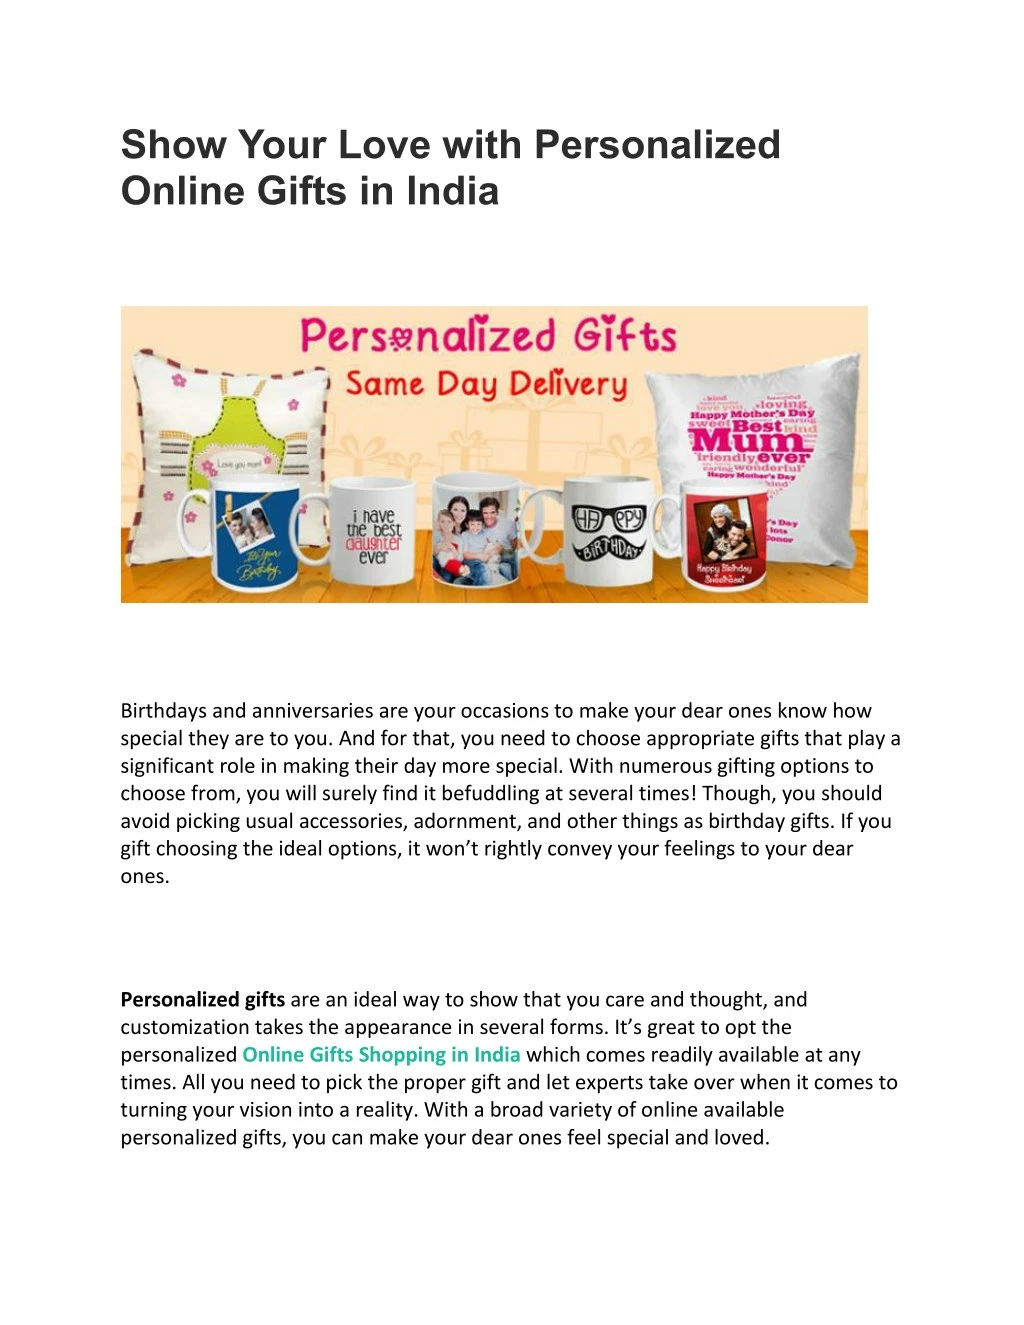 show your love with personalized online gifts